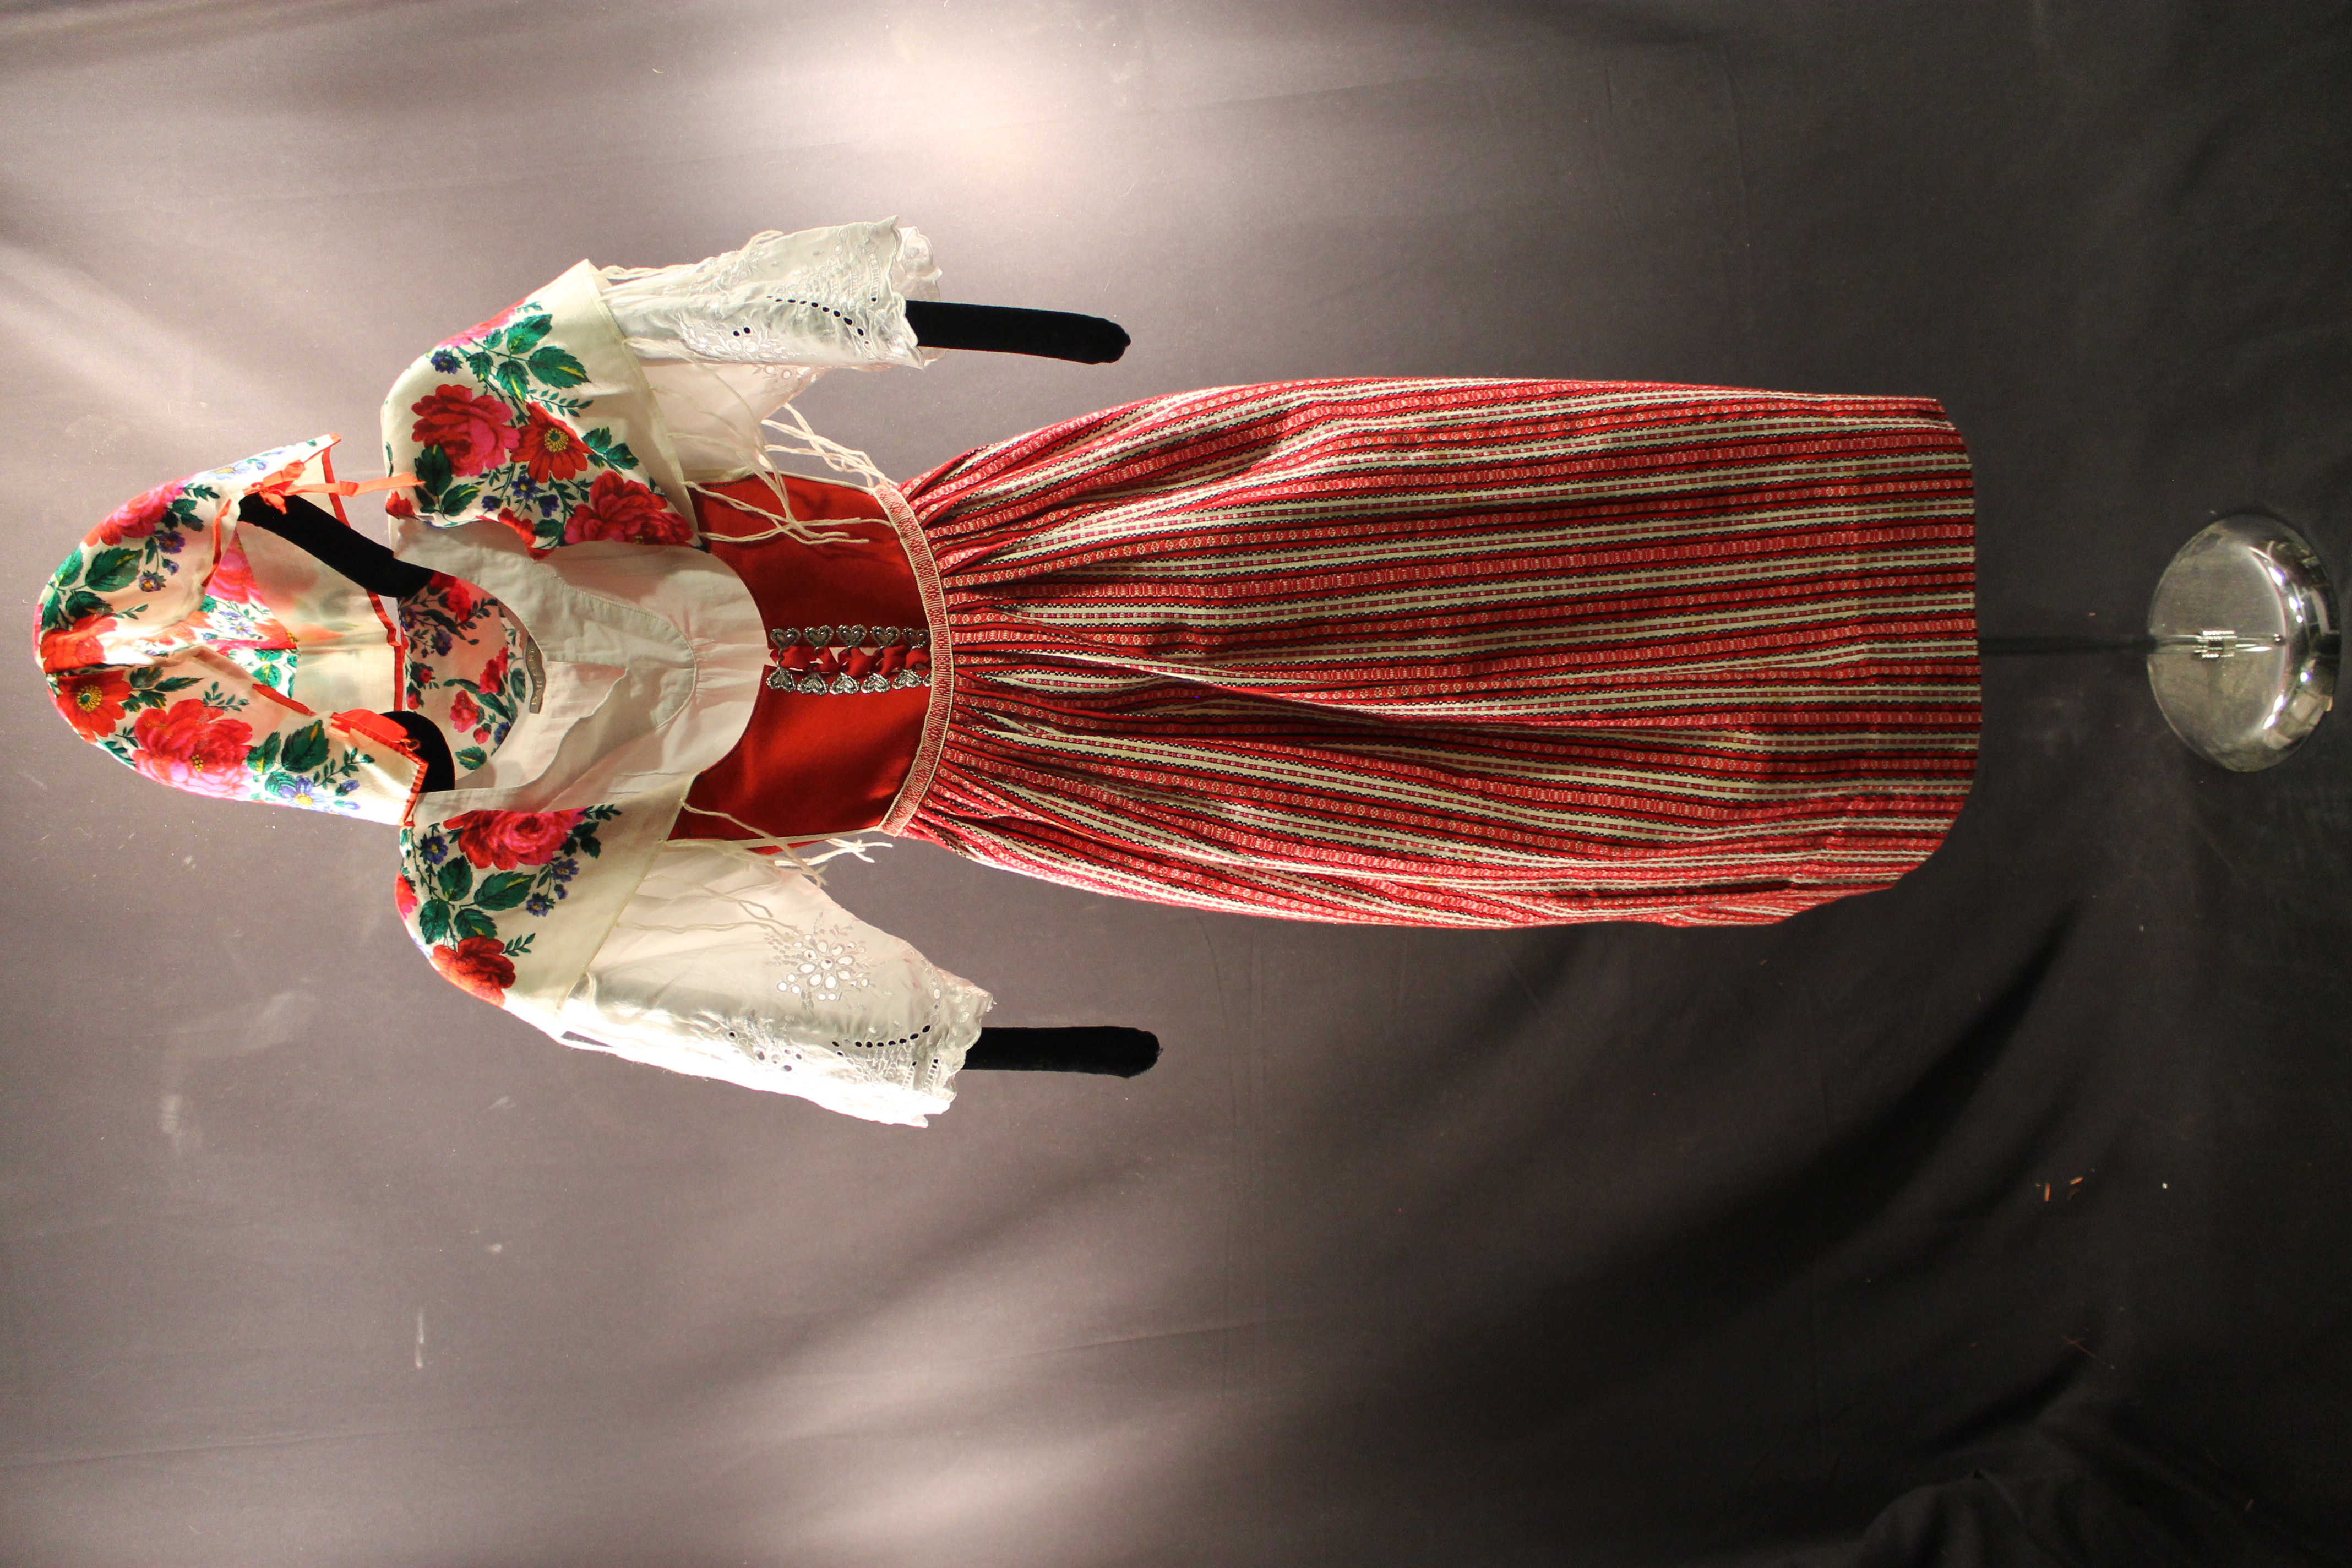 Full Austrian costume with a striped skirt, apron, top, vest, bonnet, and scarf. All follow the same red and white colors. Scarf and bonnet decorated with red roses.